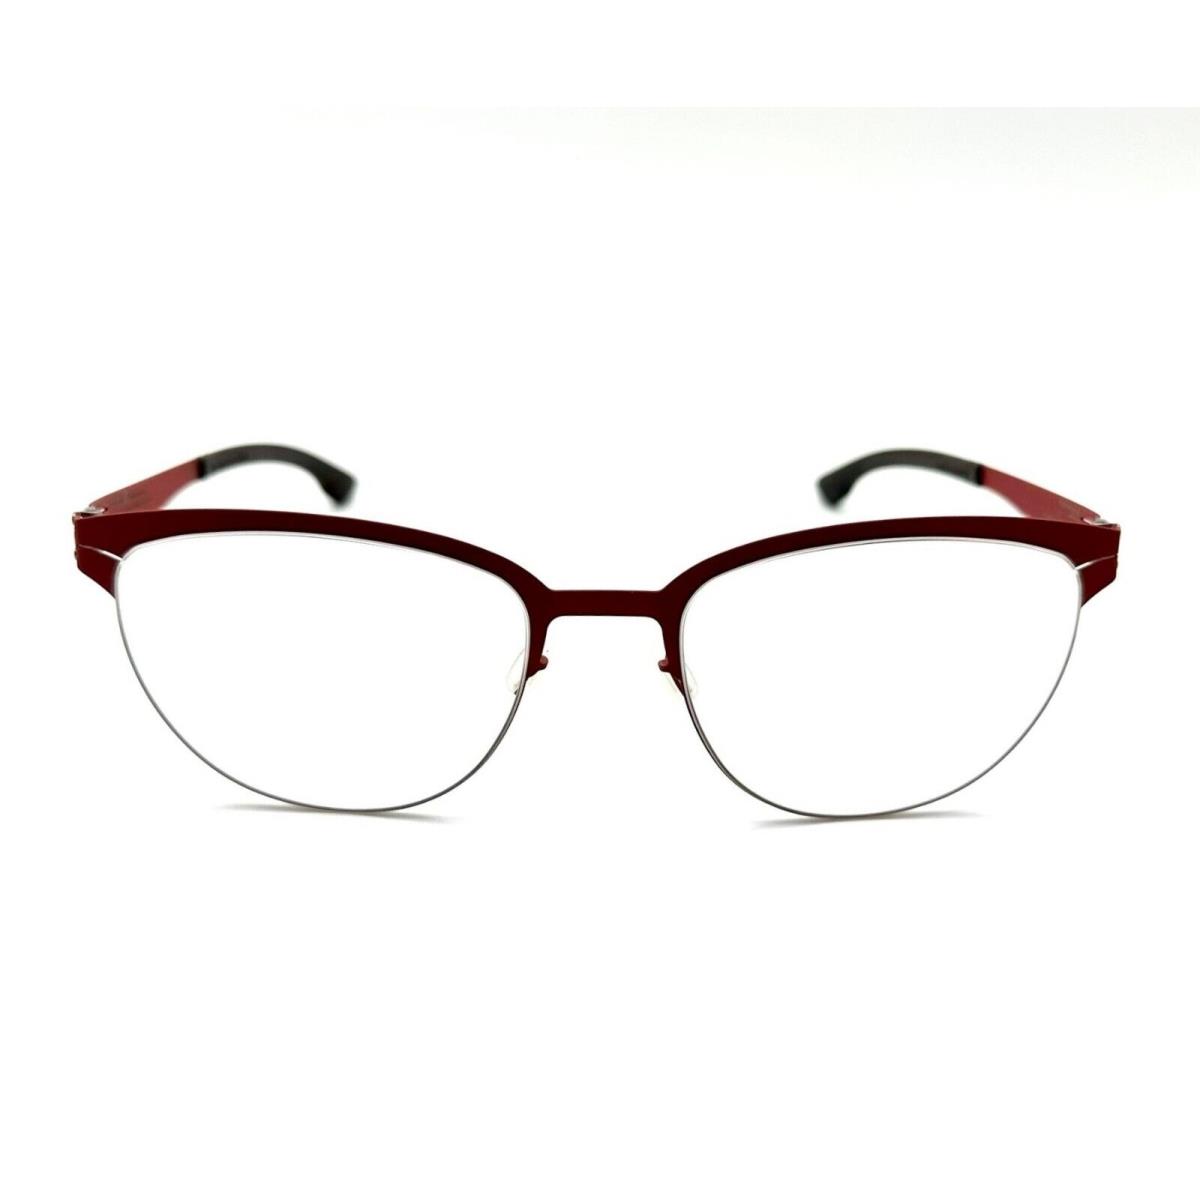 ic Berlin The Ingenue Eyeglasses Carmine Red/nougat / Rx-clear Lens 53mm